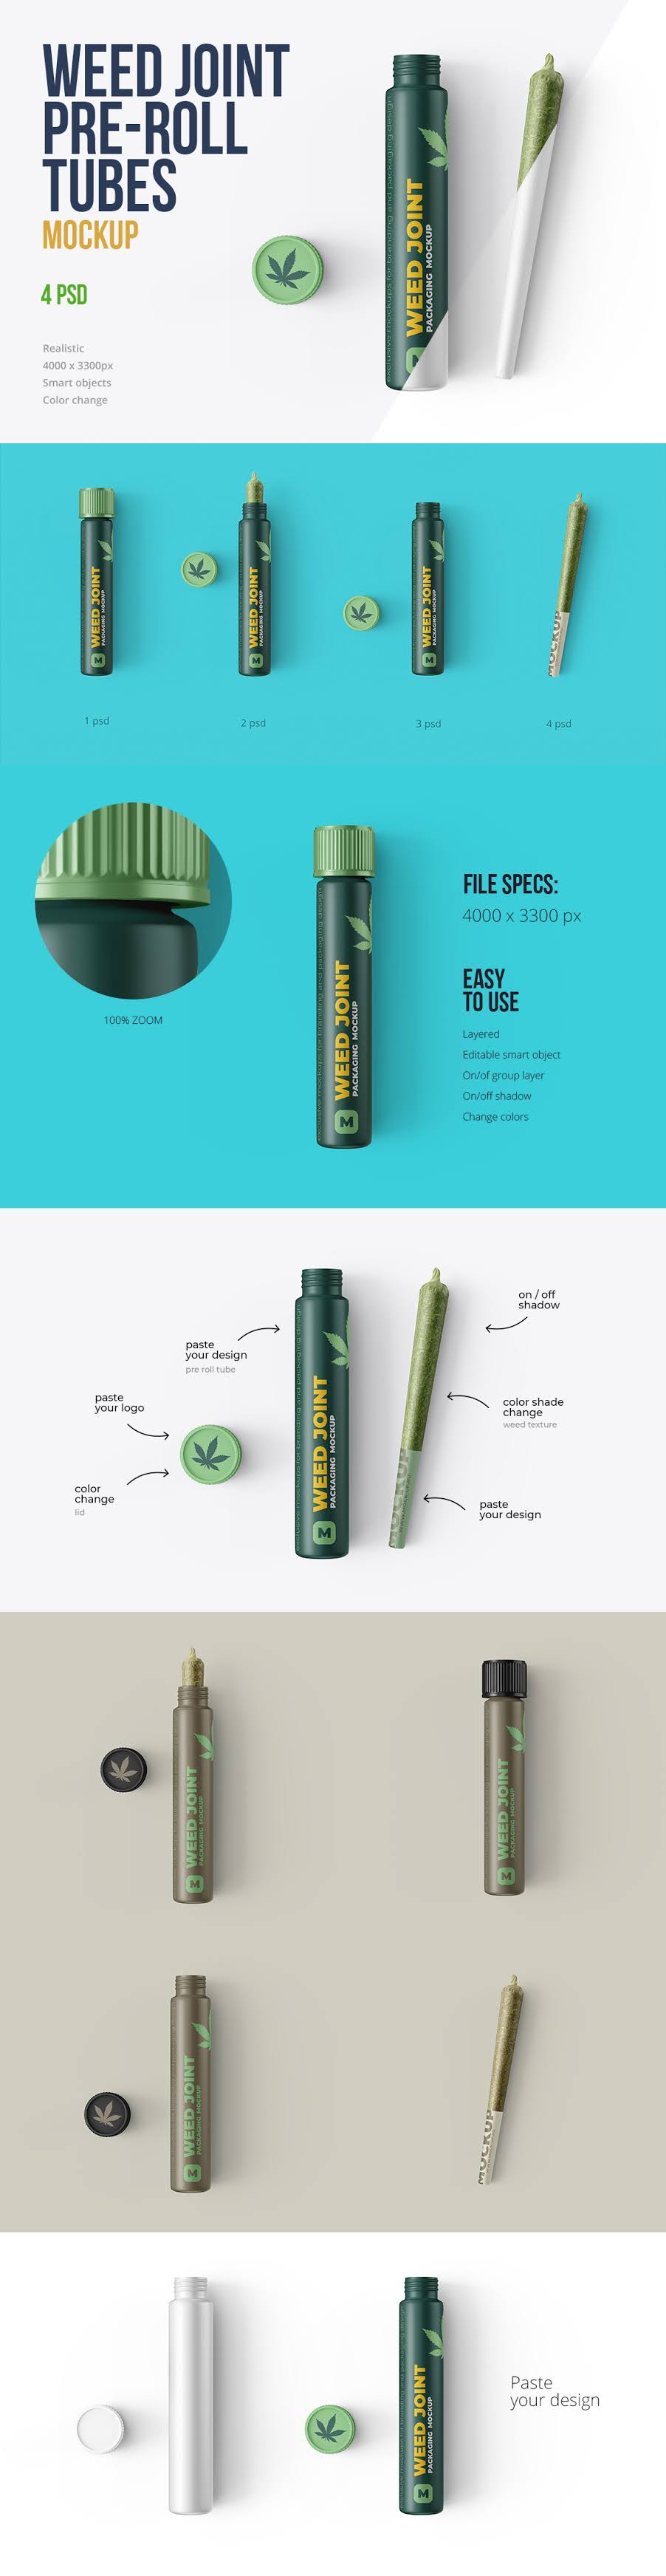 Weed Joint Pre-Roll Tubes 4 PSD